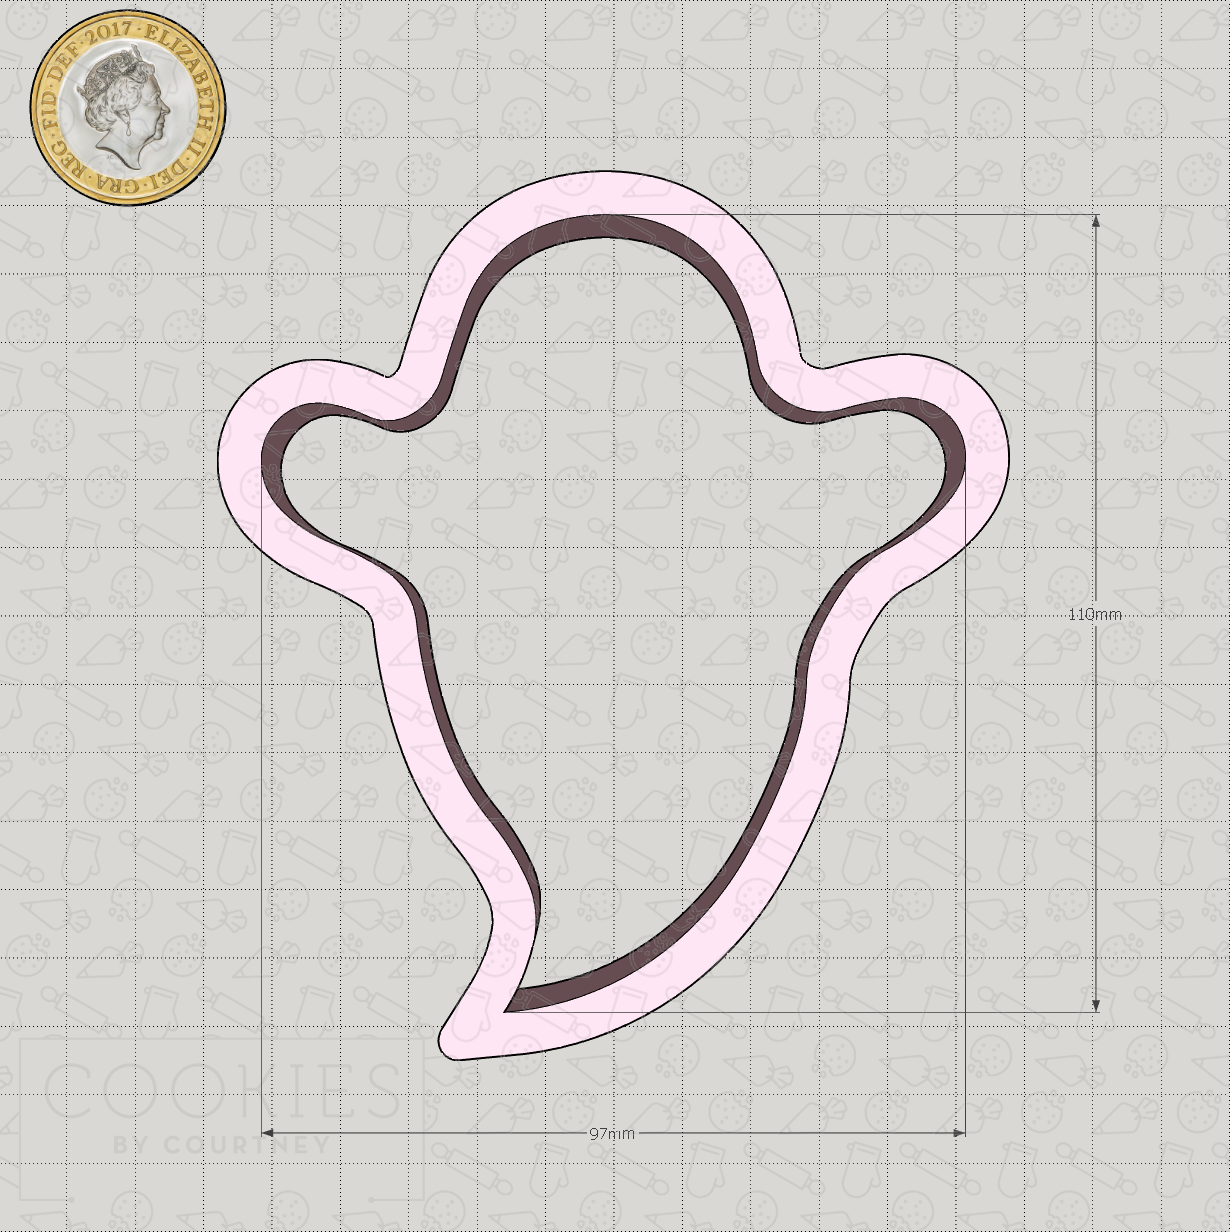 Ghost 2 Cookie Cutter